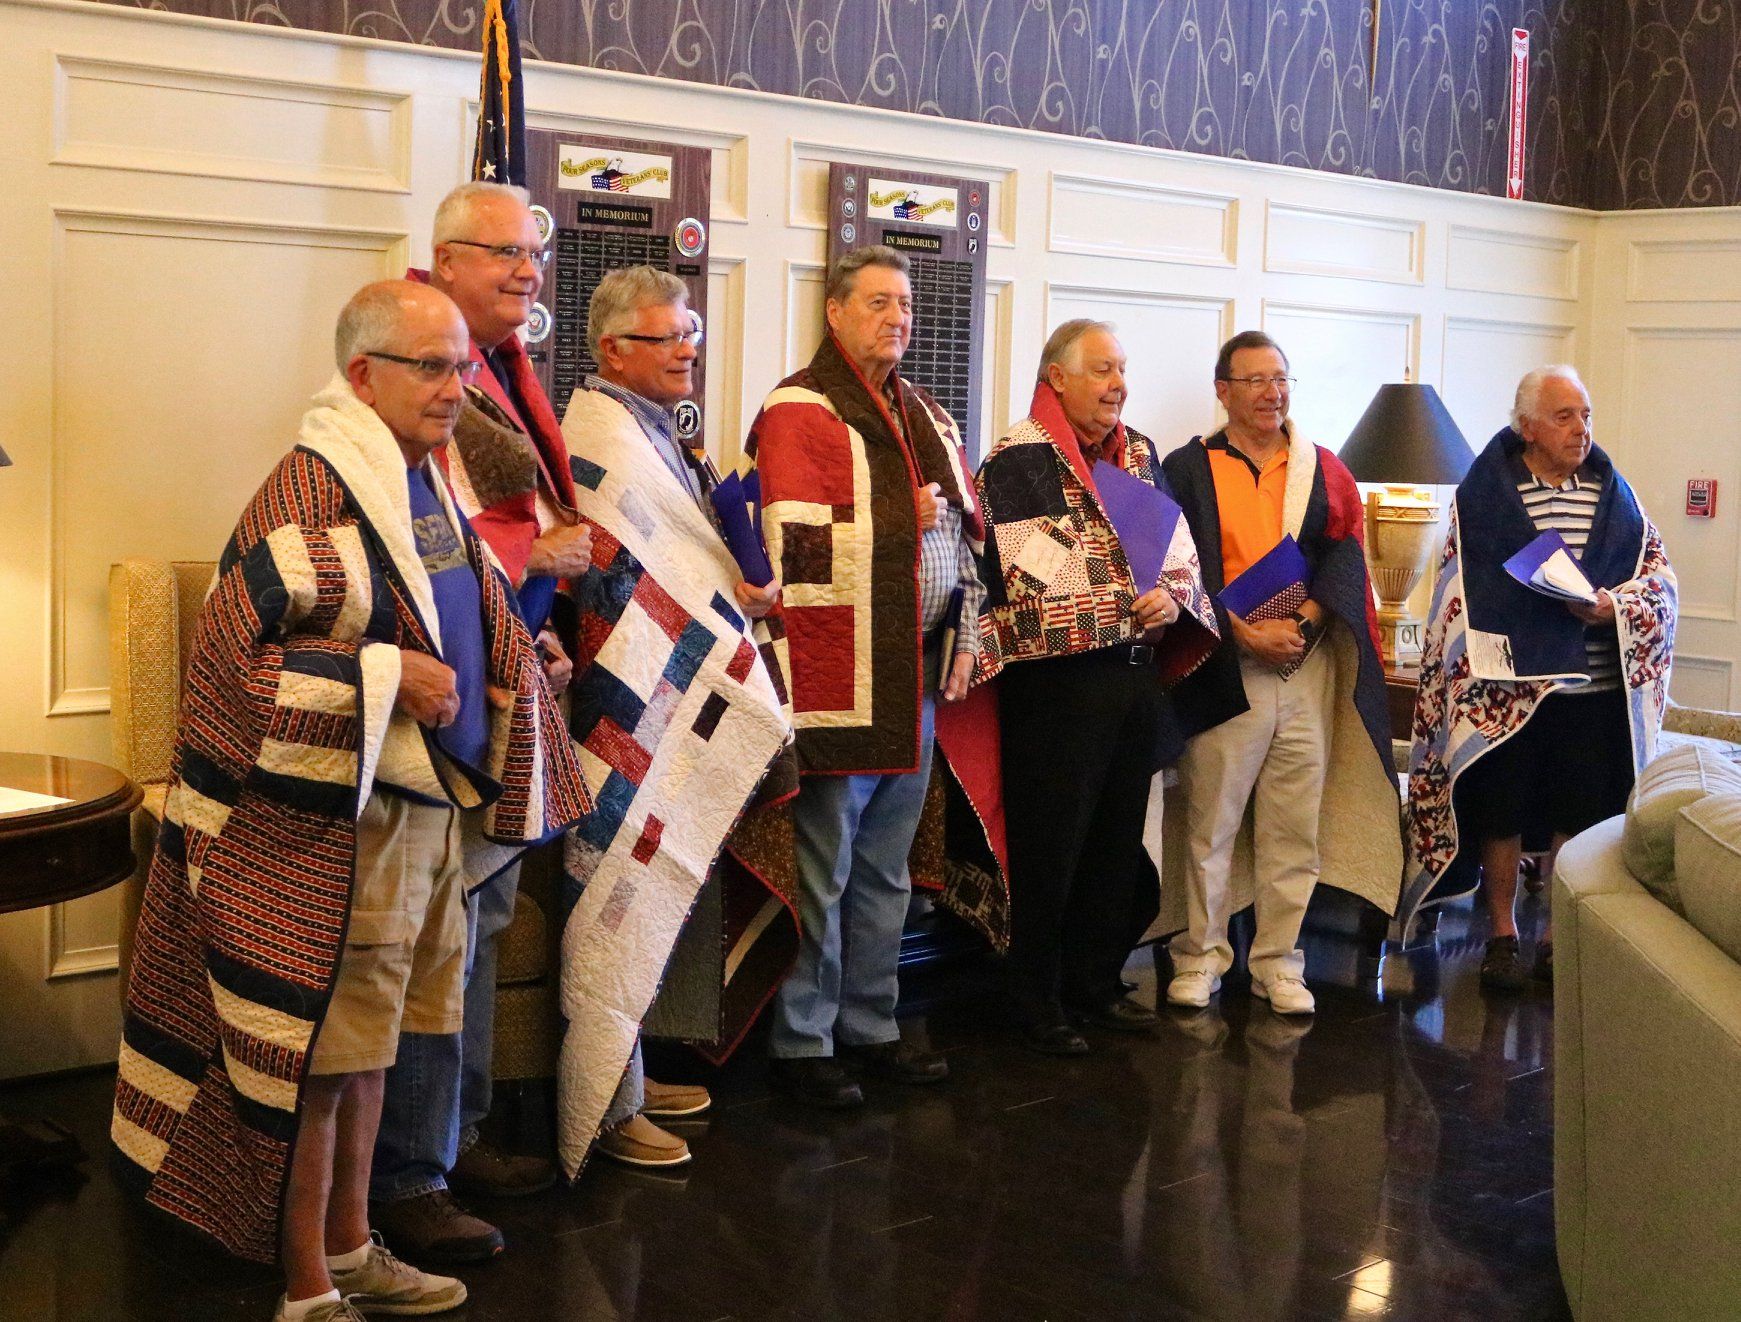 Group of men standing with quilts wrapped around their shoulders. These are veterans who were interviewed for the Veterans History Project. They were honored with the quilts from the Quilts of Valor project.